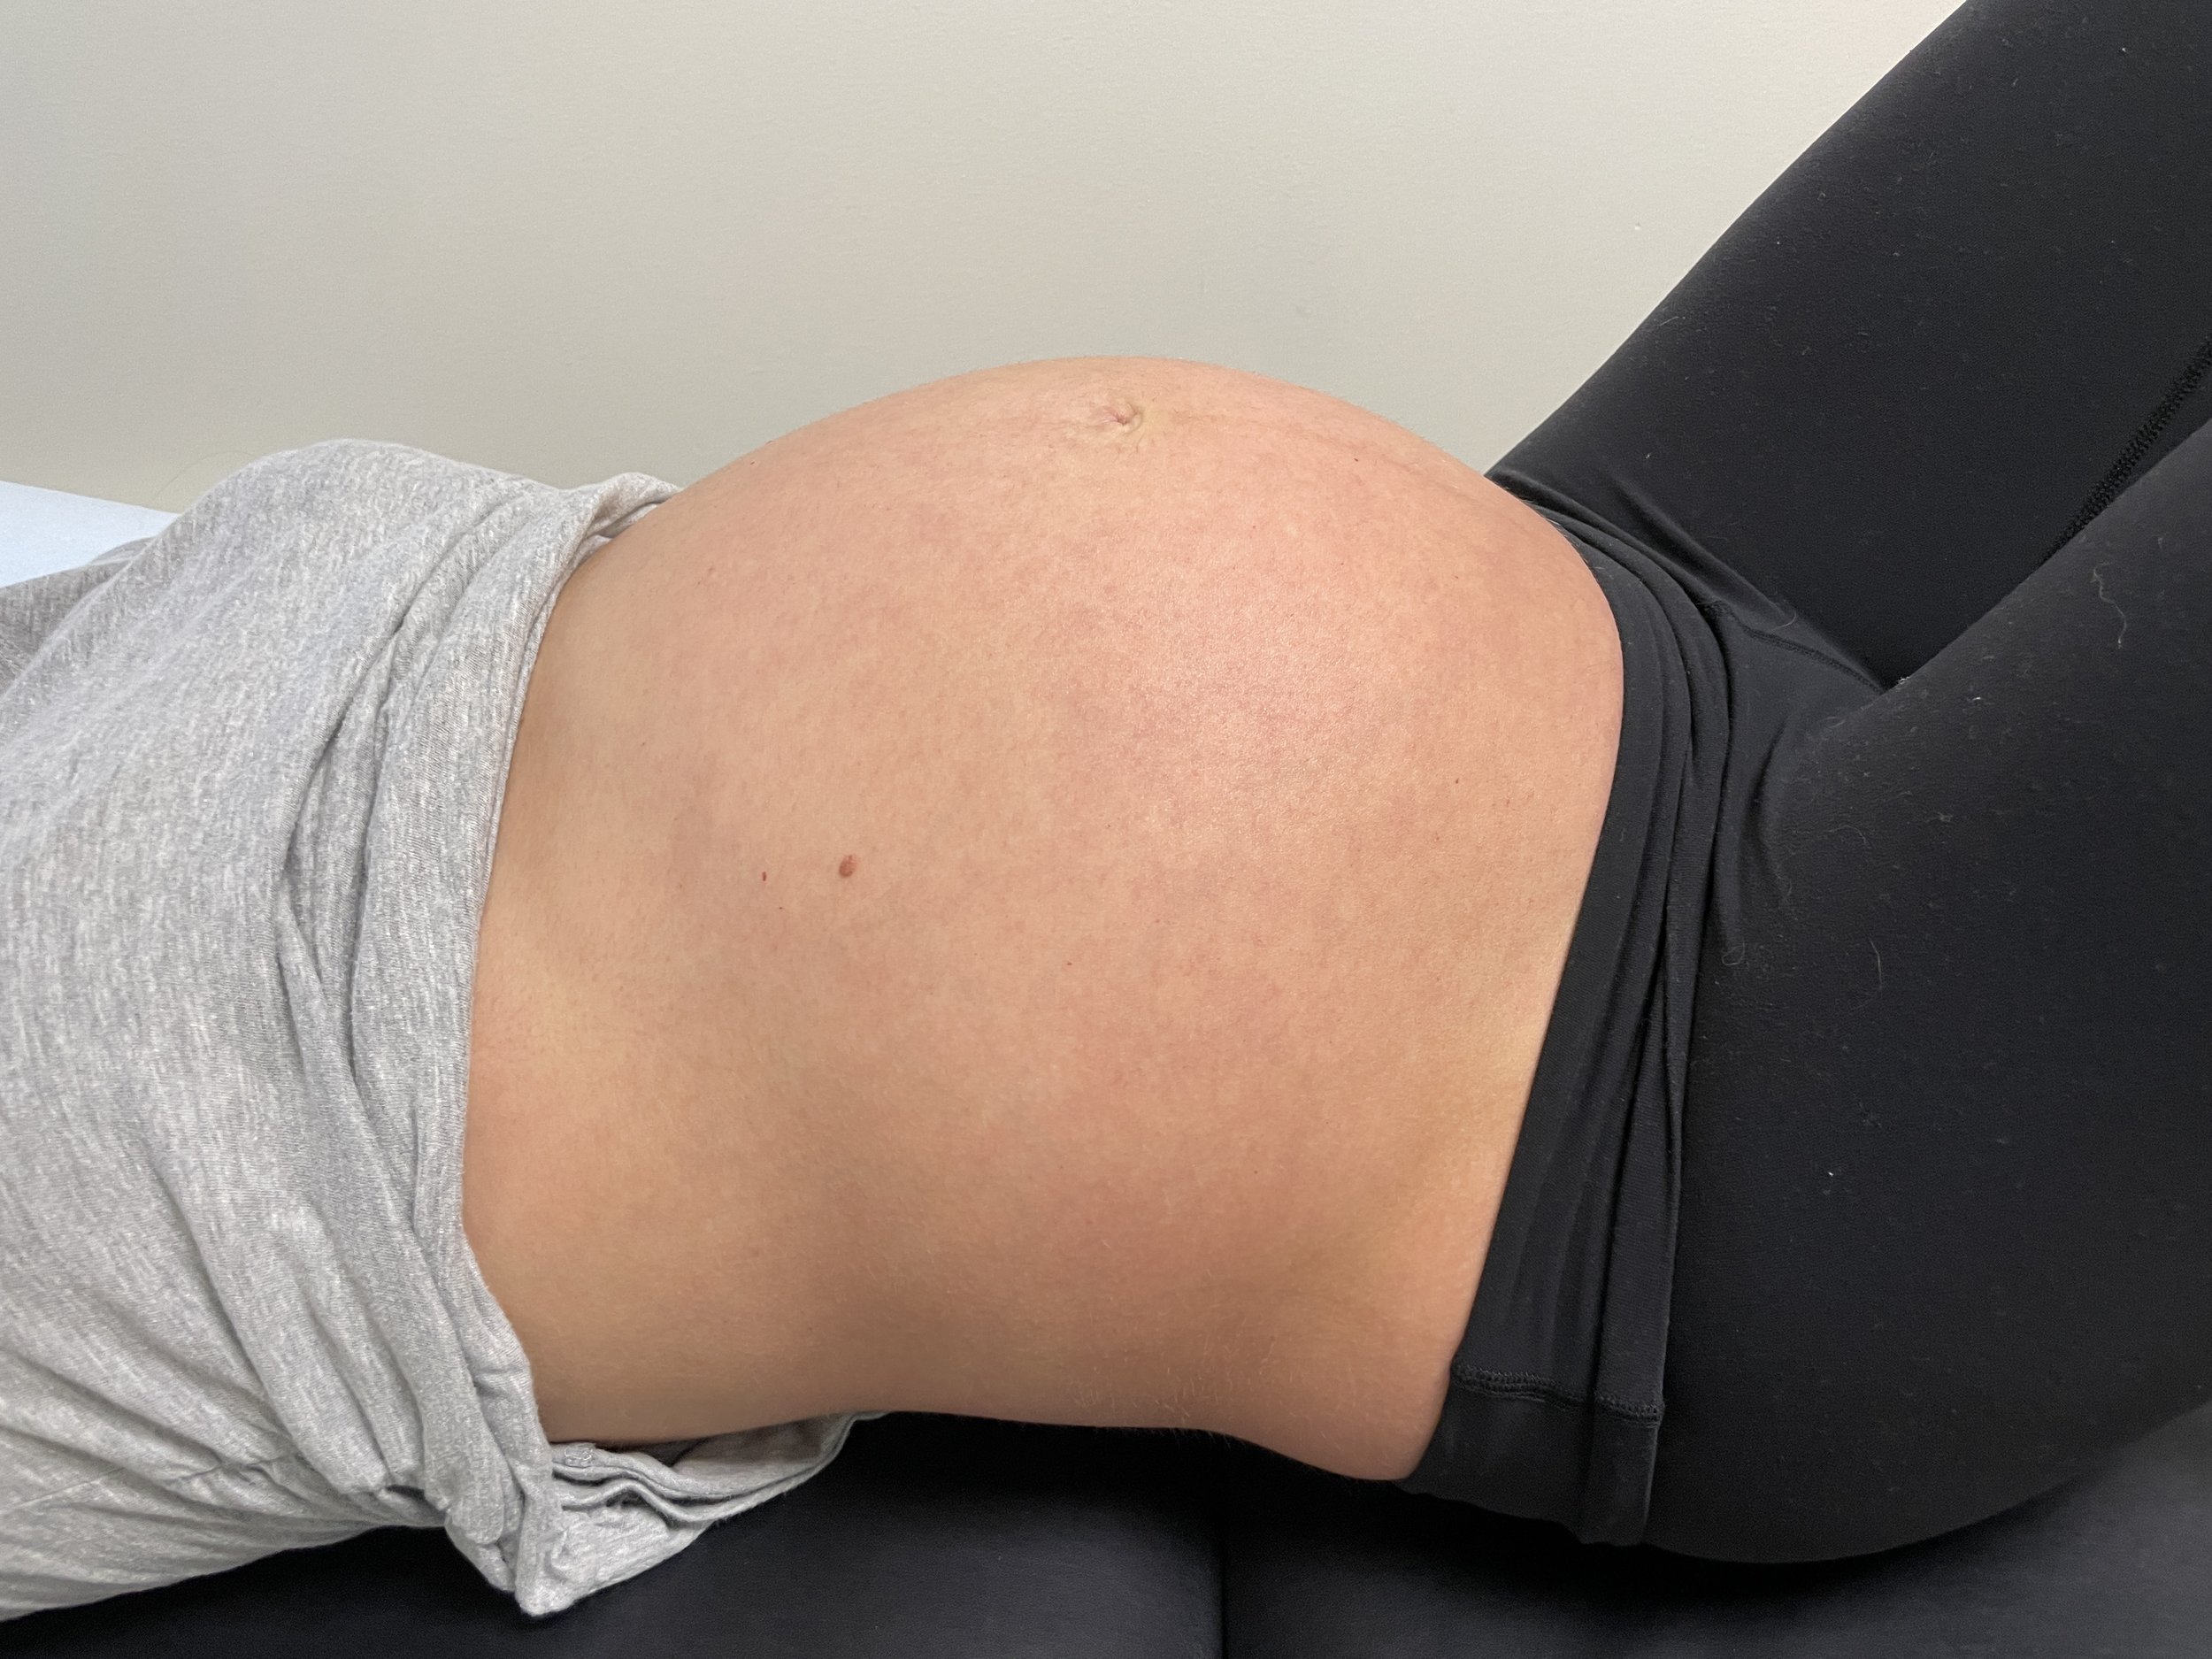 Taping Techniques to Alleviate Pregnancy Pain